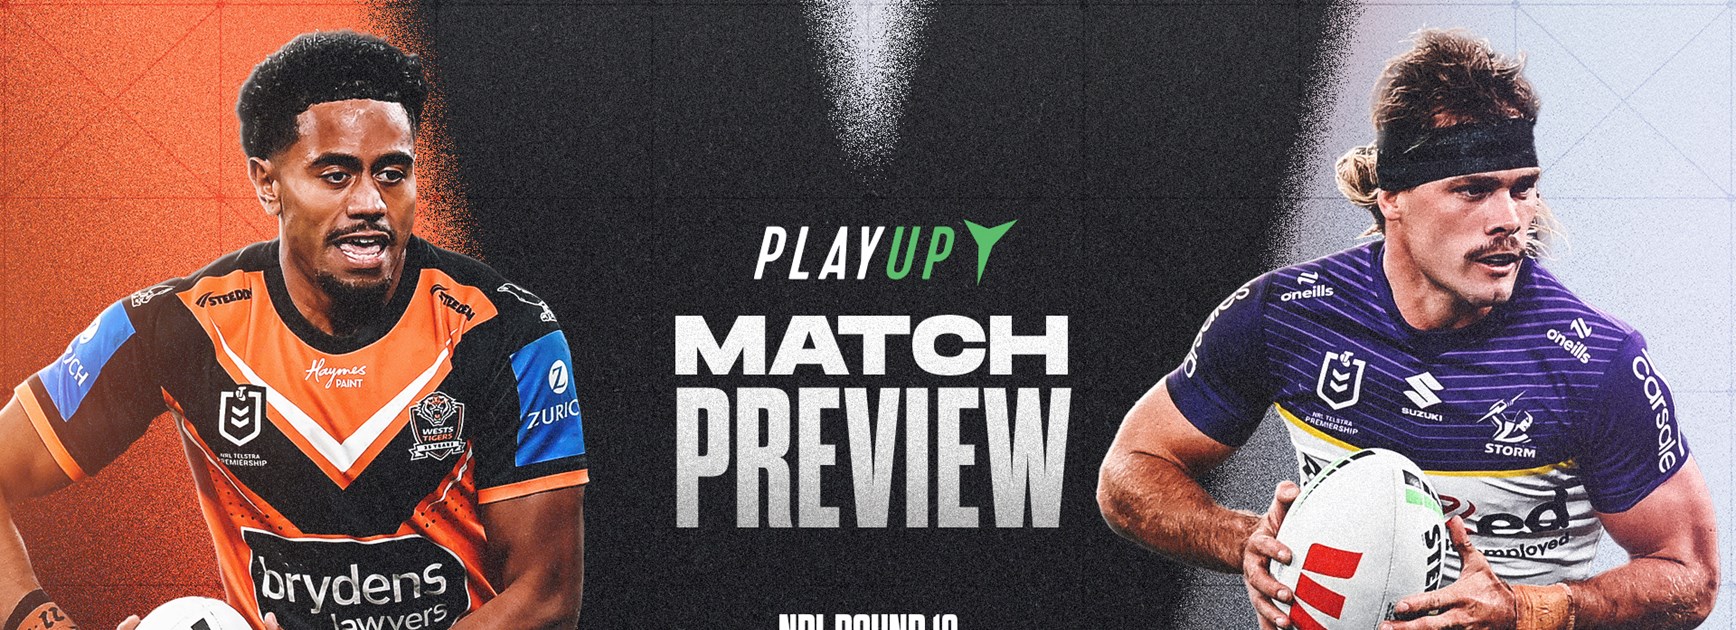 Match Preview: Round 18 vs Storm